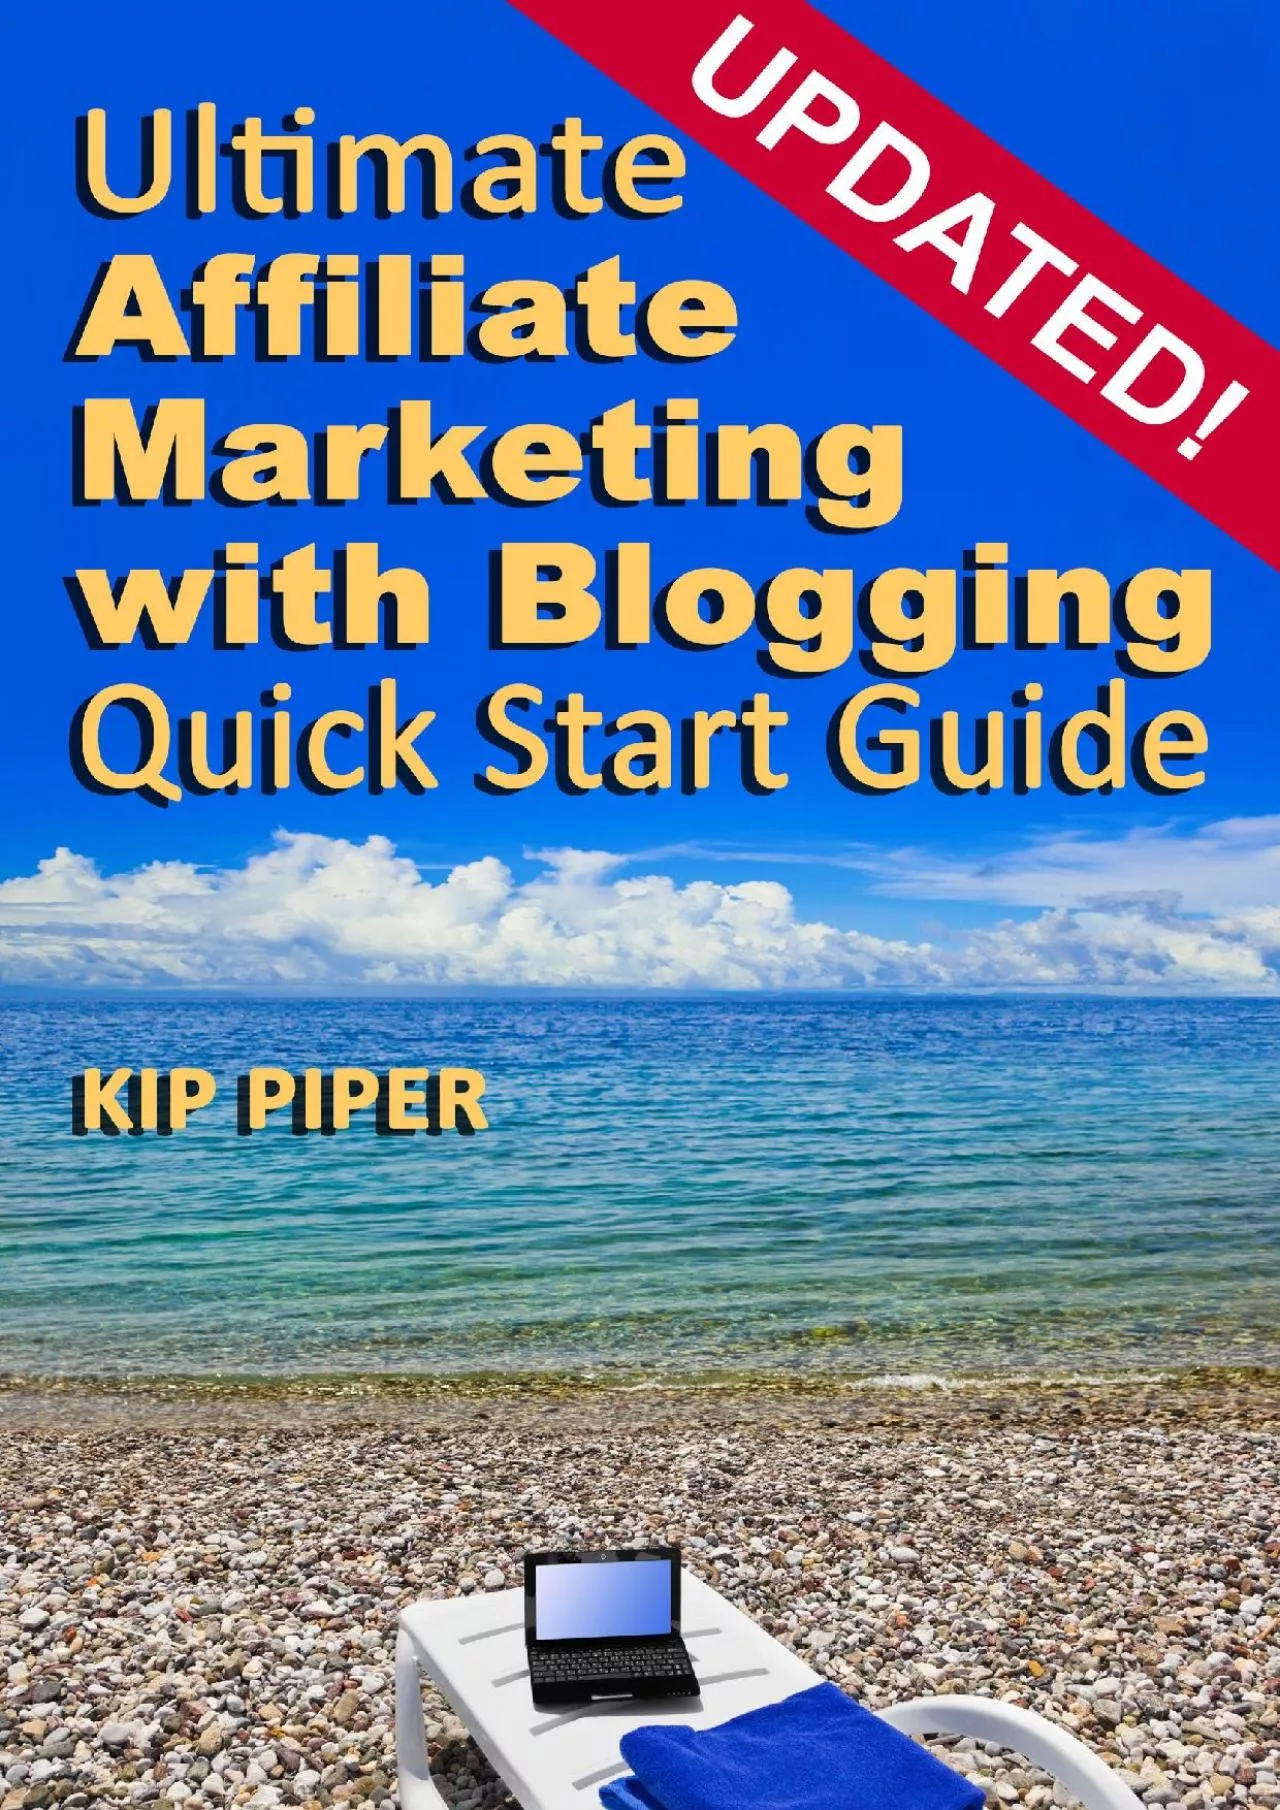 Ultimate Affiliate Marketing with Blogging Quick Start Guide The “How to” Program